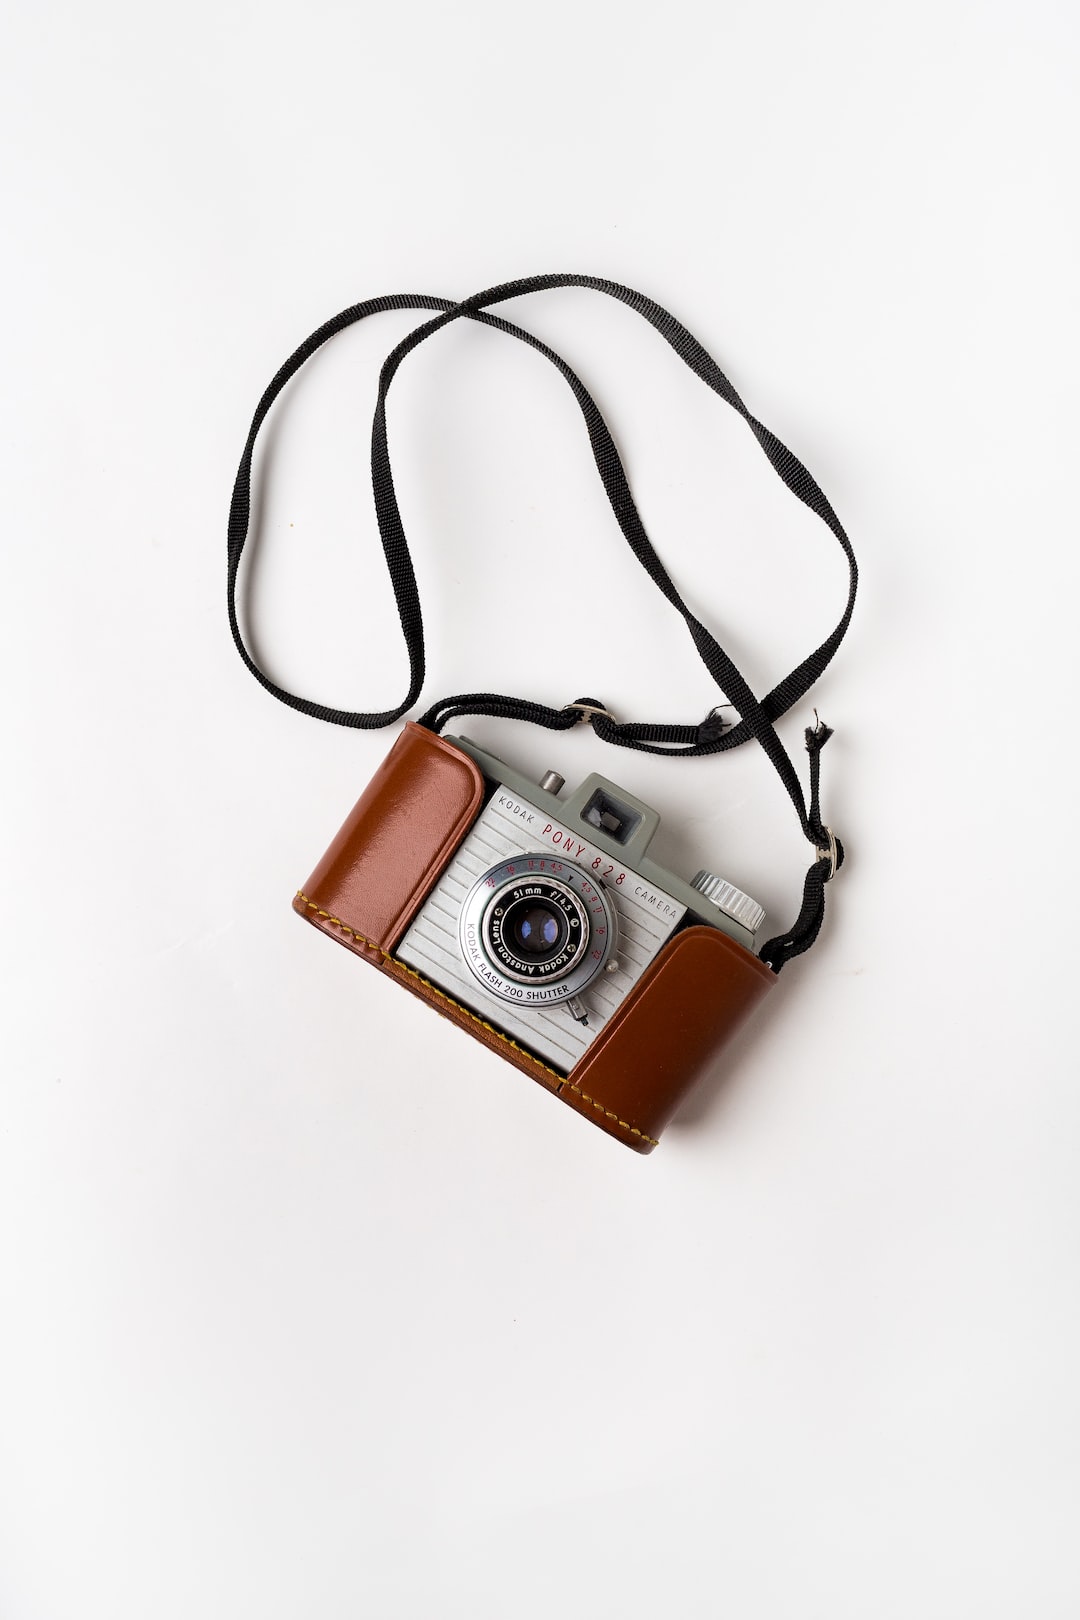 brown and gray SLR camera on white surface